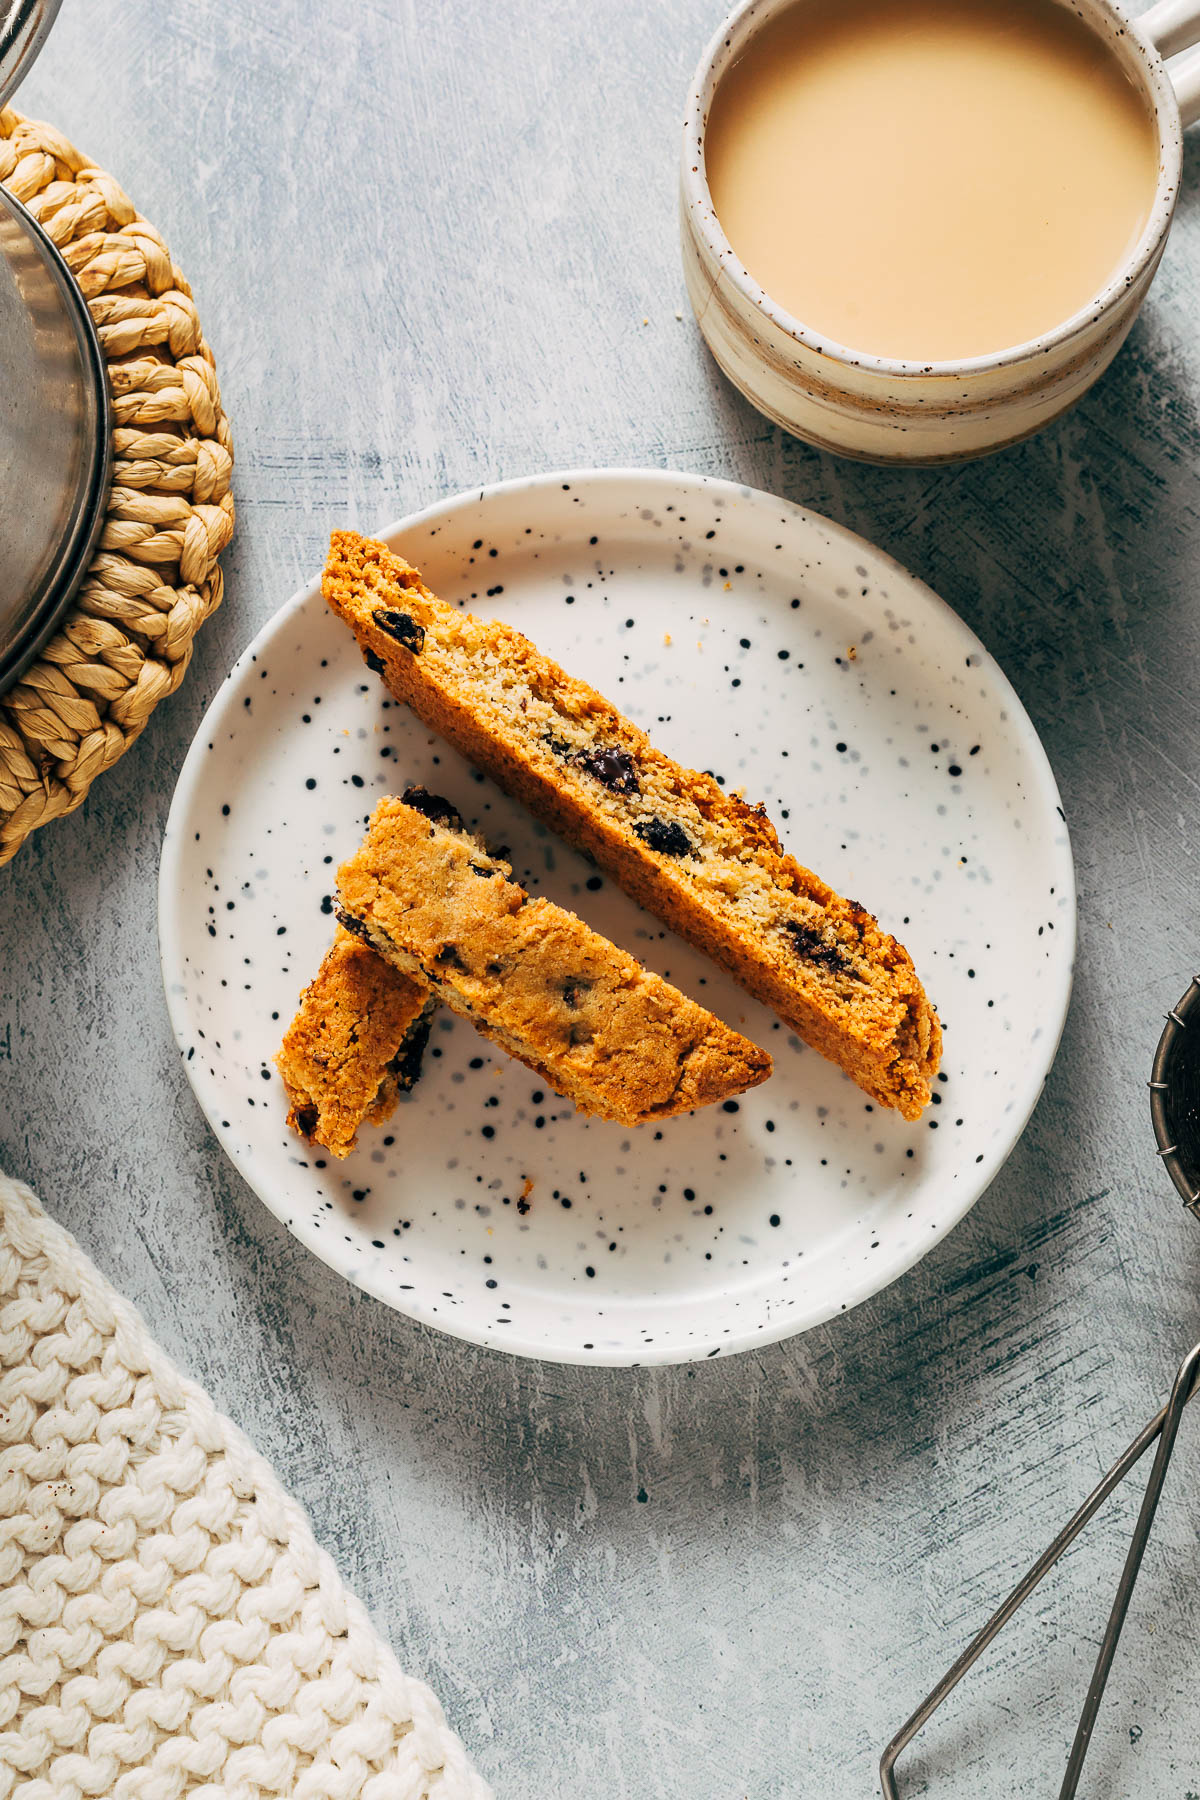 Biscotti on a small plate with milky coffee.